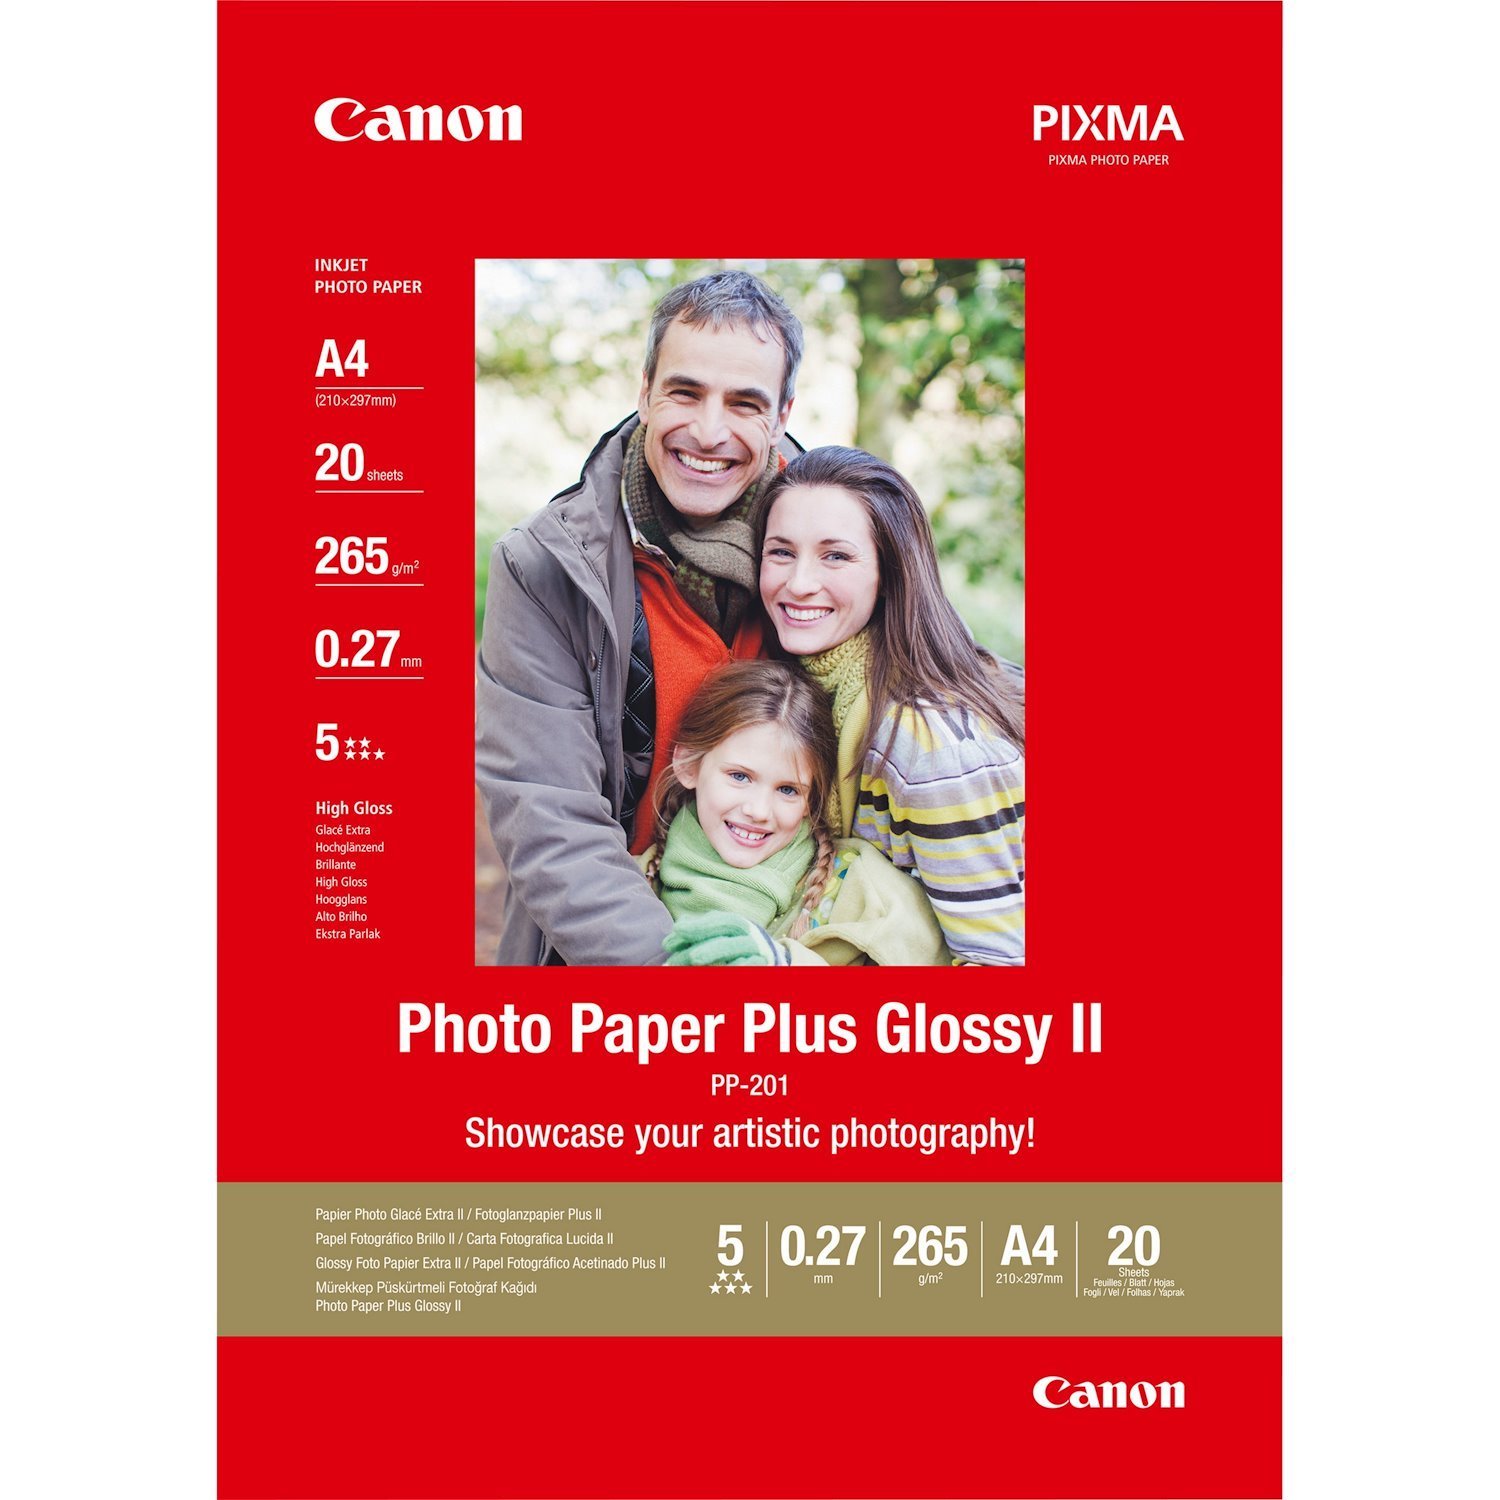 Canon PP-201 Glossy Ii Photo Paper Plus A4 - 20 Sheets (Canon PP-201 Glossy Photo Paper A4 20 Sheets - 2311B019)